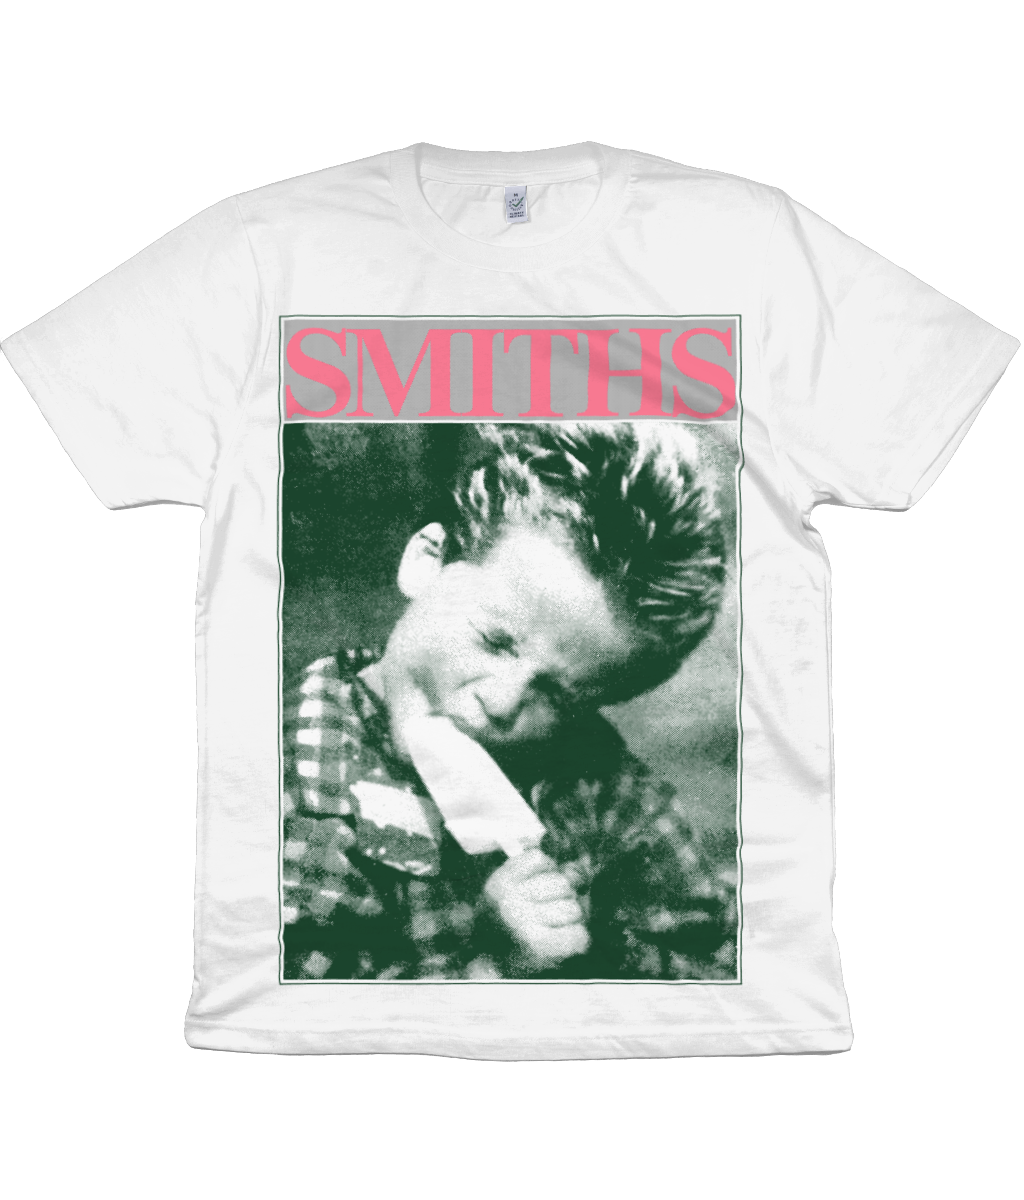 THE SMITHS - The Queen Is Dead - UK Tour - 1986